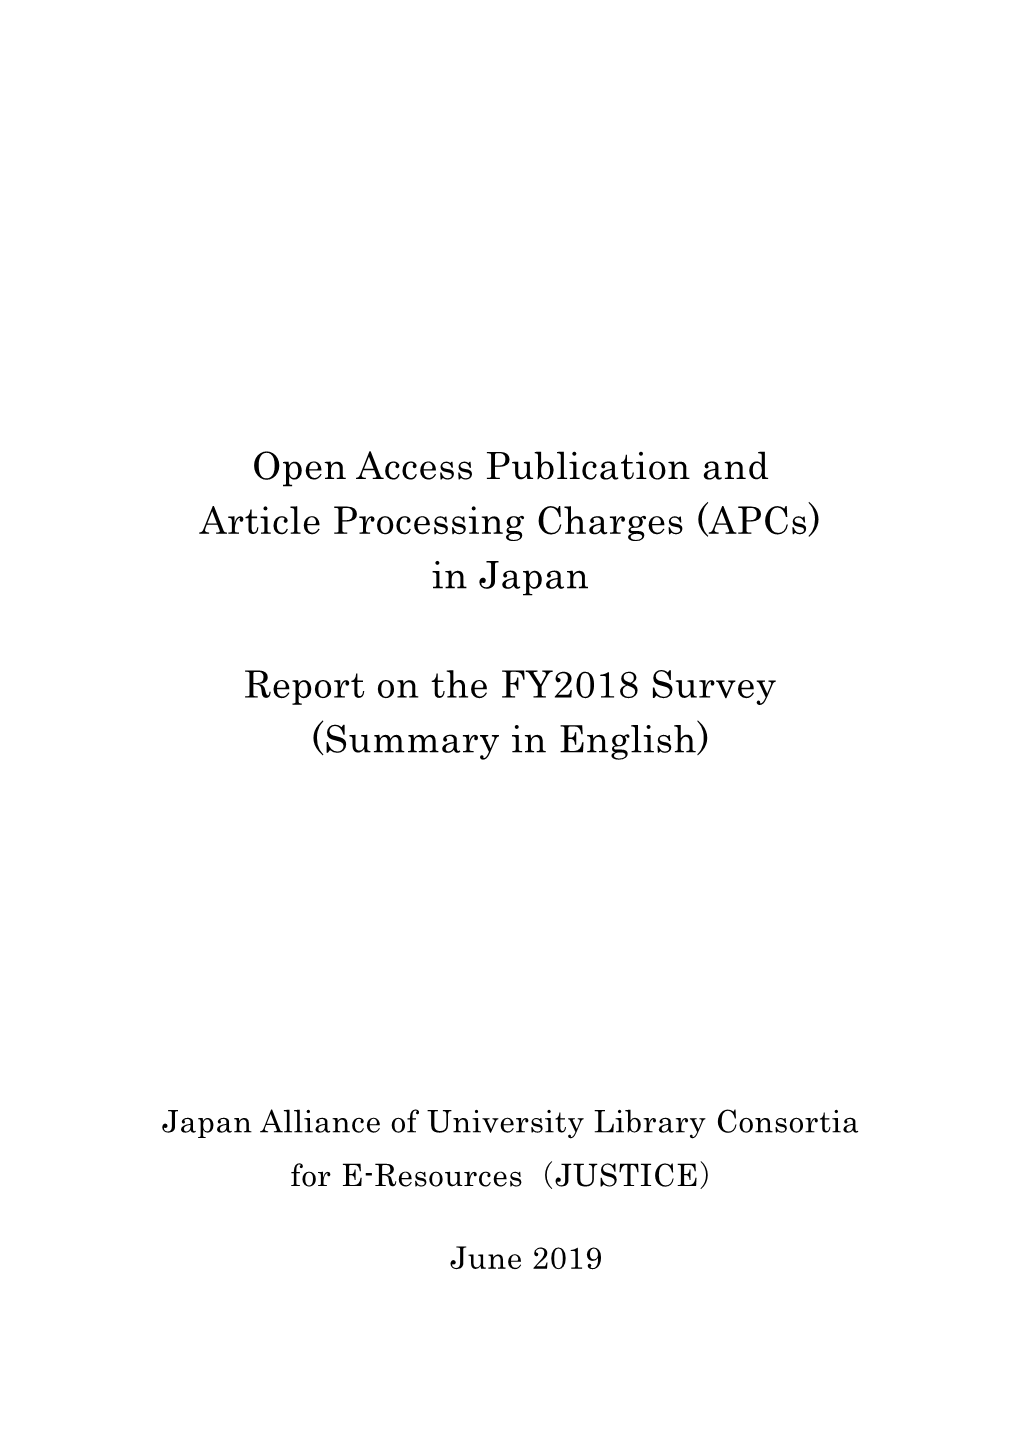 Open Access Publication and Article Processing Charges (Apcs) in Japan